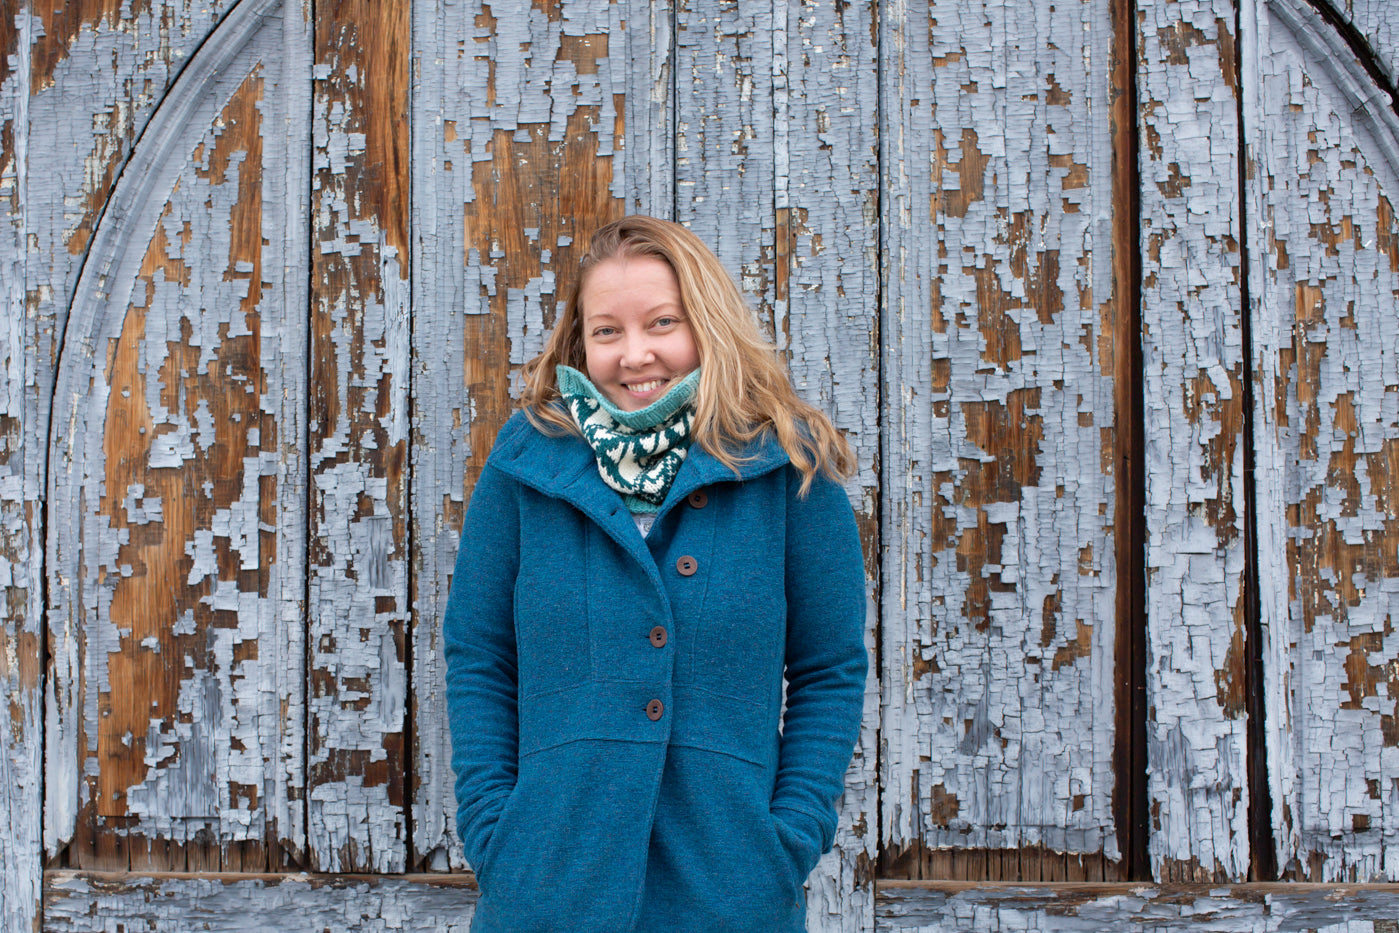 Danielle agains a peeling grey wooden backdrop.  Danielle is in a dark sky blue peacoat with her hand in her pockets.  With a white, turquoise and teal cowl around her neck.